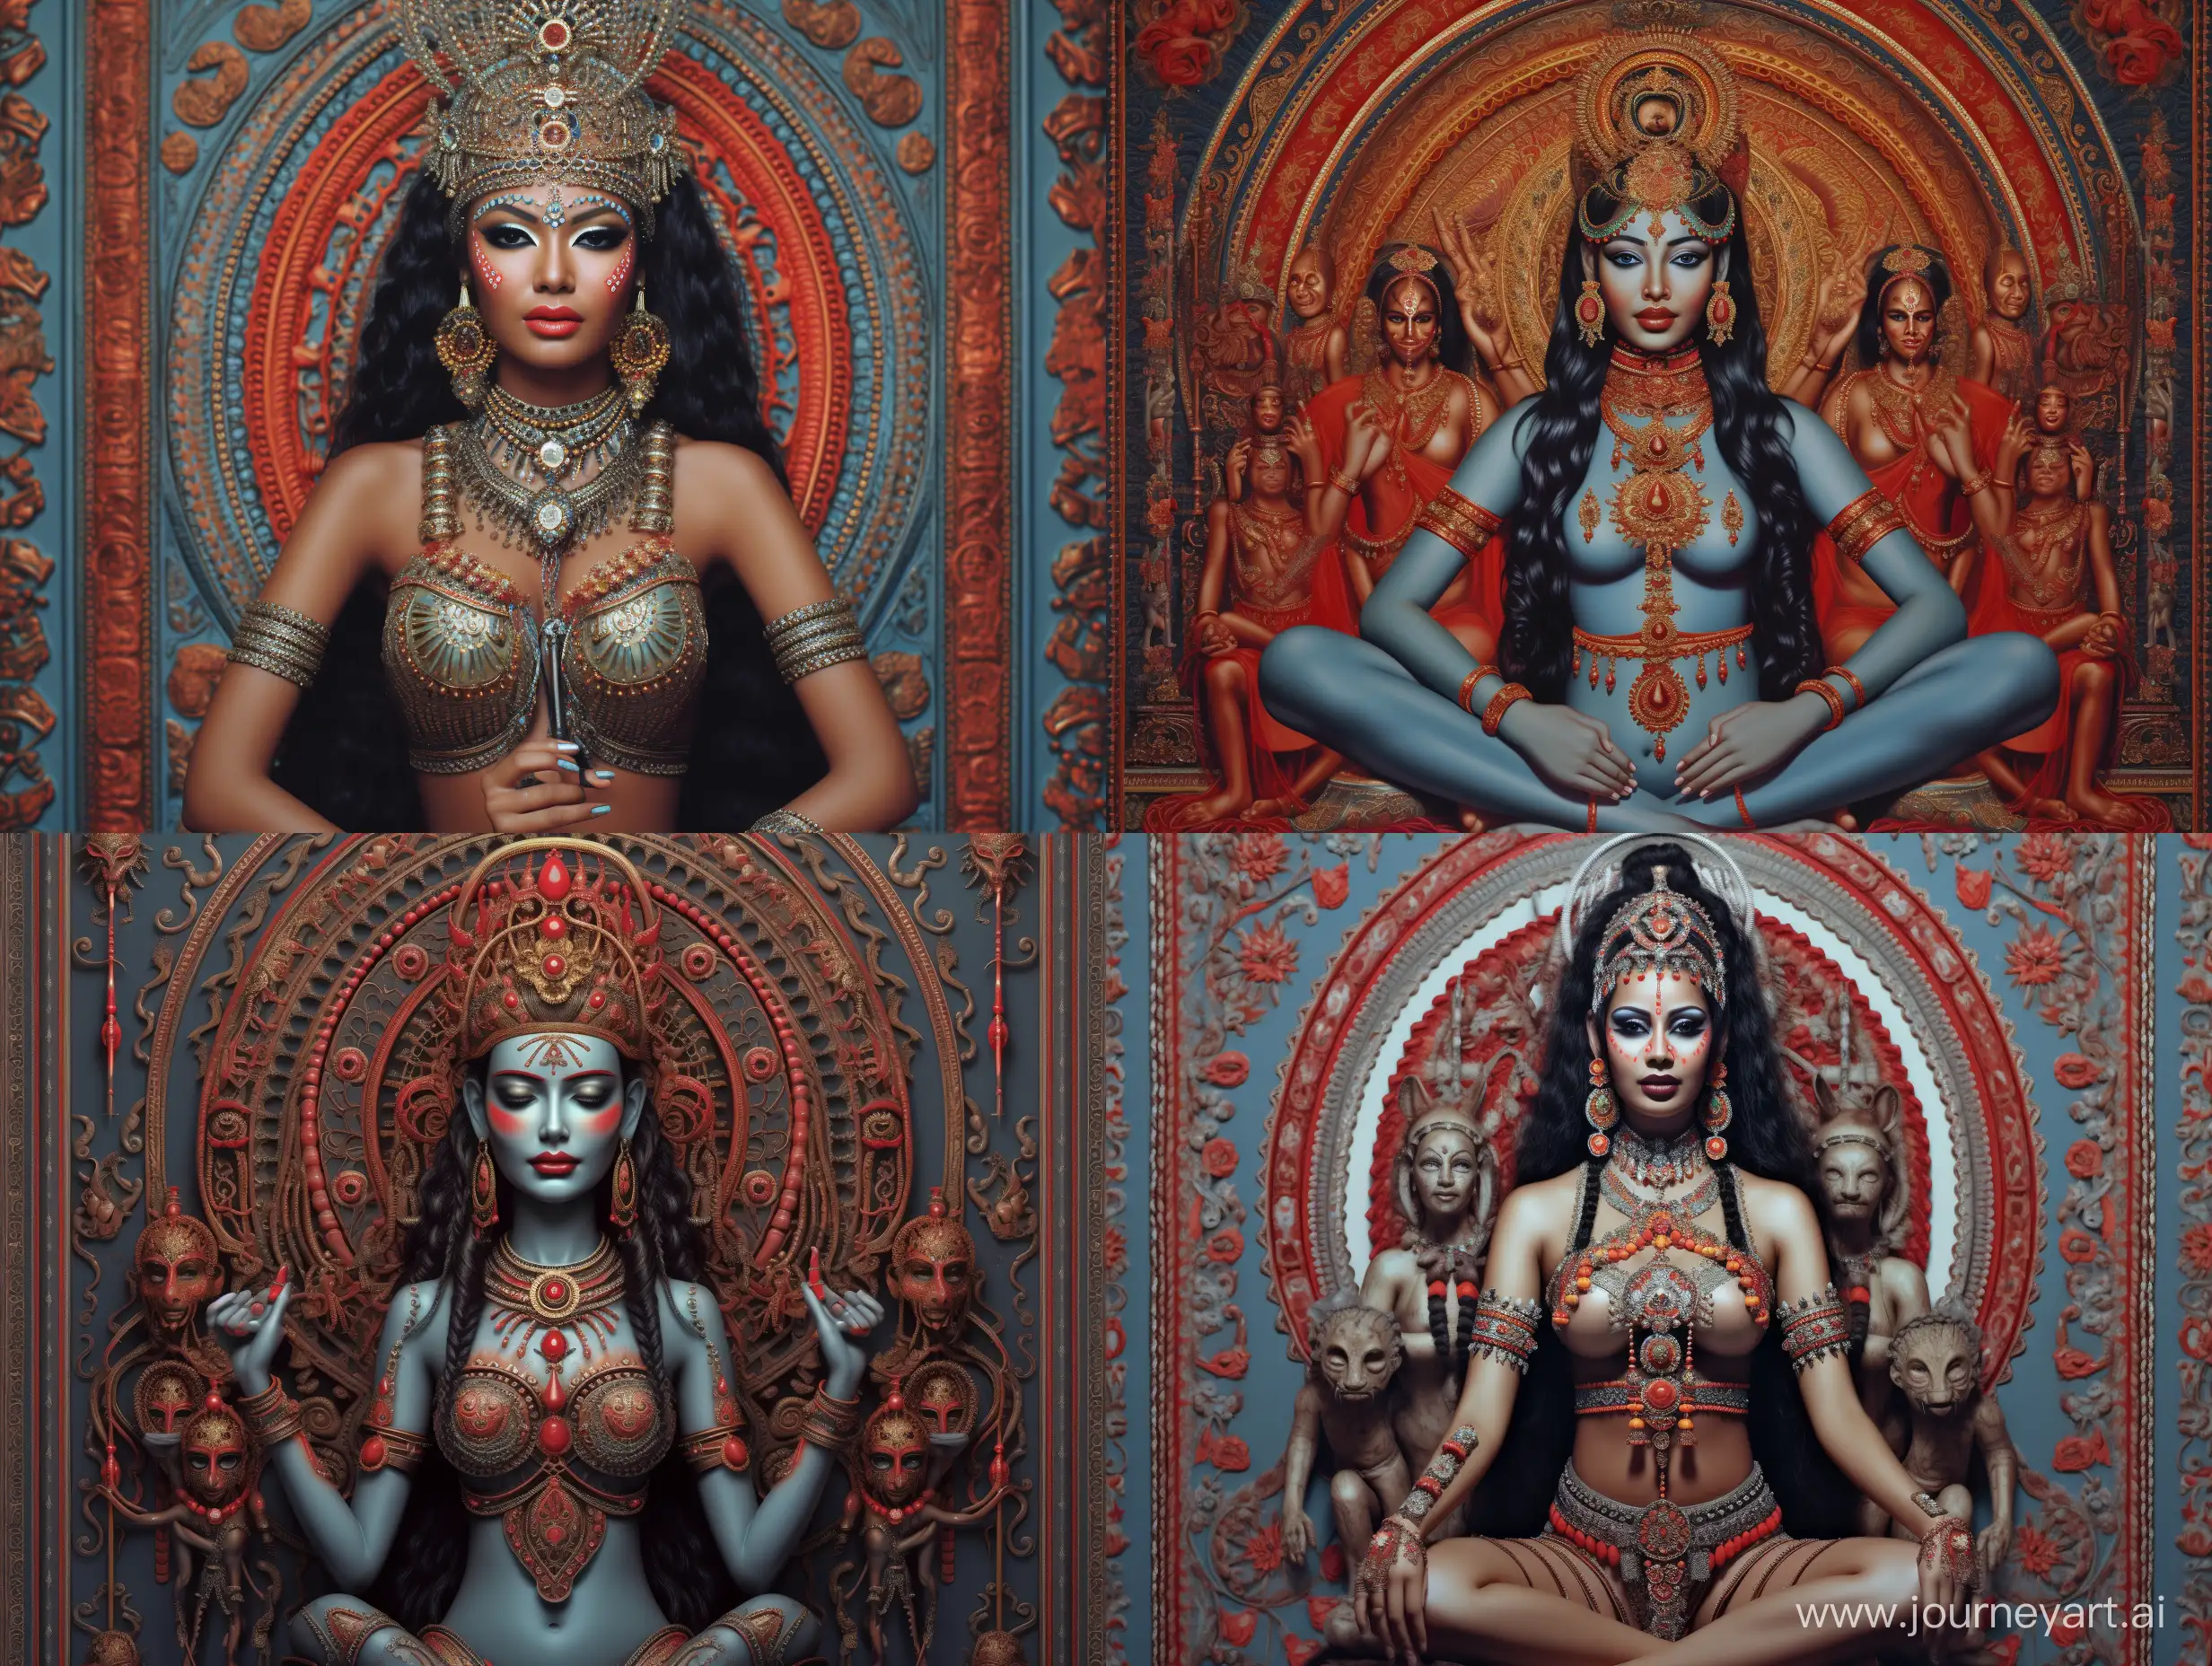 Photorealistic-Depiction-of-Goddess-Kali-in-43-Aspect-Ratio